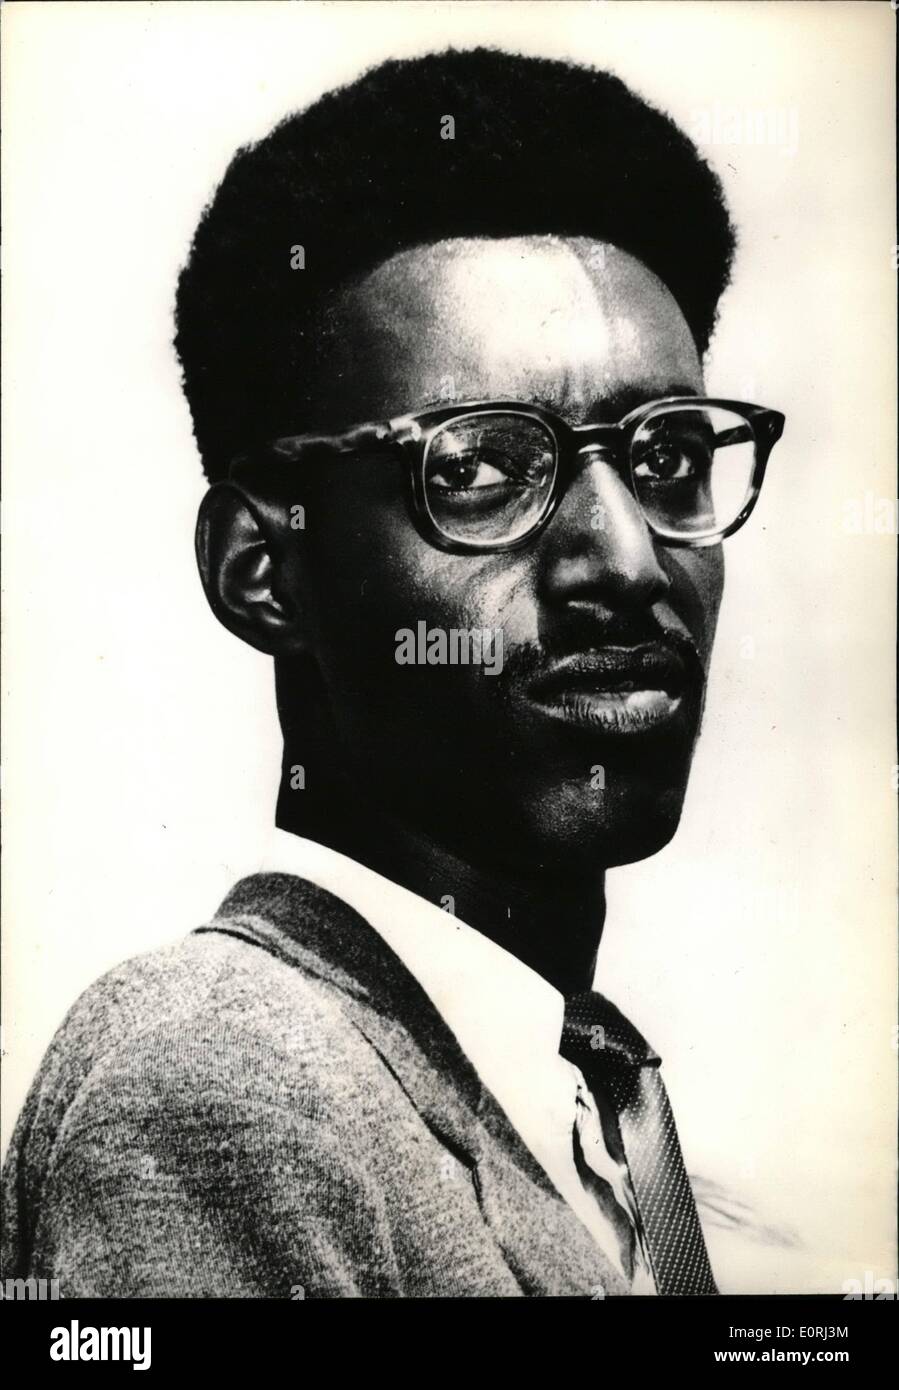 Nov. 11, 1959 - Belgium Tackles Colonial Problem After Recent Congo Outbreaks: The Recent Outbreaks In The Belgian Congo Seem To Be Greatly Worrying The Belgian Government. King Baudouin Is Reported To Have Invited The Bami (Sultans) Of Ruanda And Of Urundi. Photo shows A Recent Portrait Of The Bami Of Urundi. Stock Photo